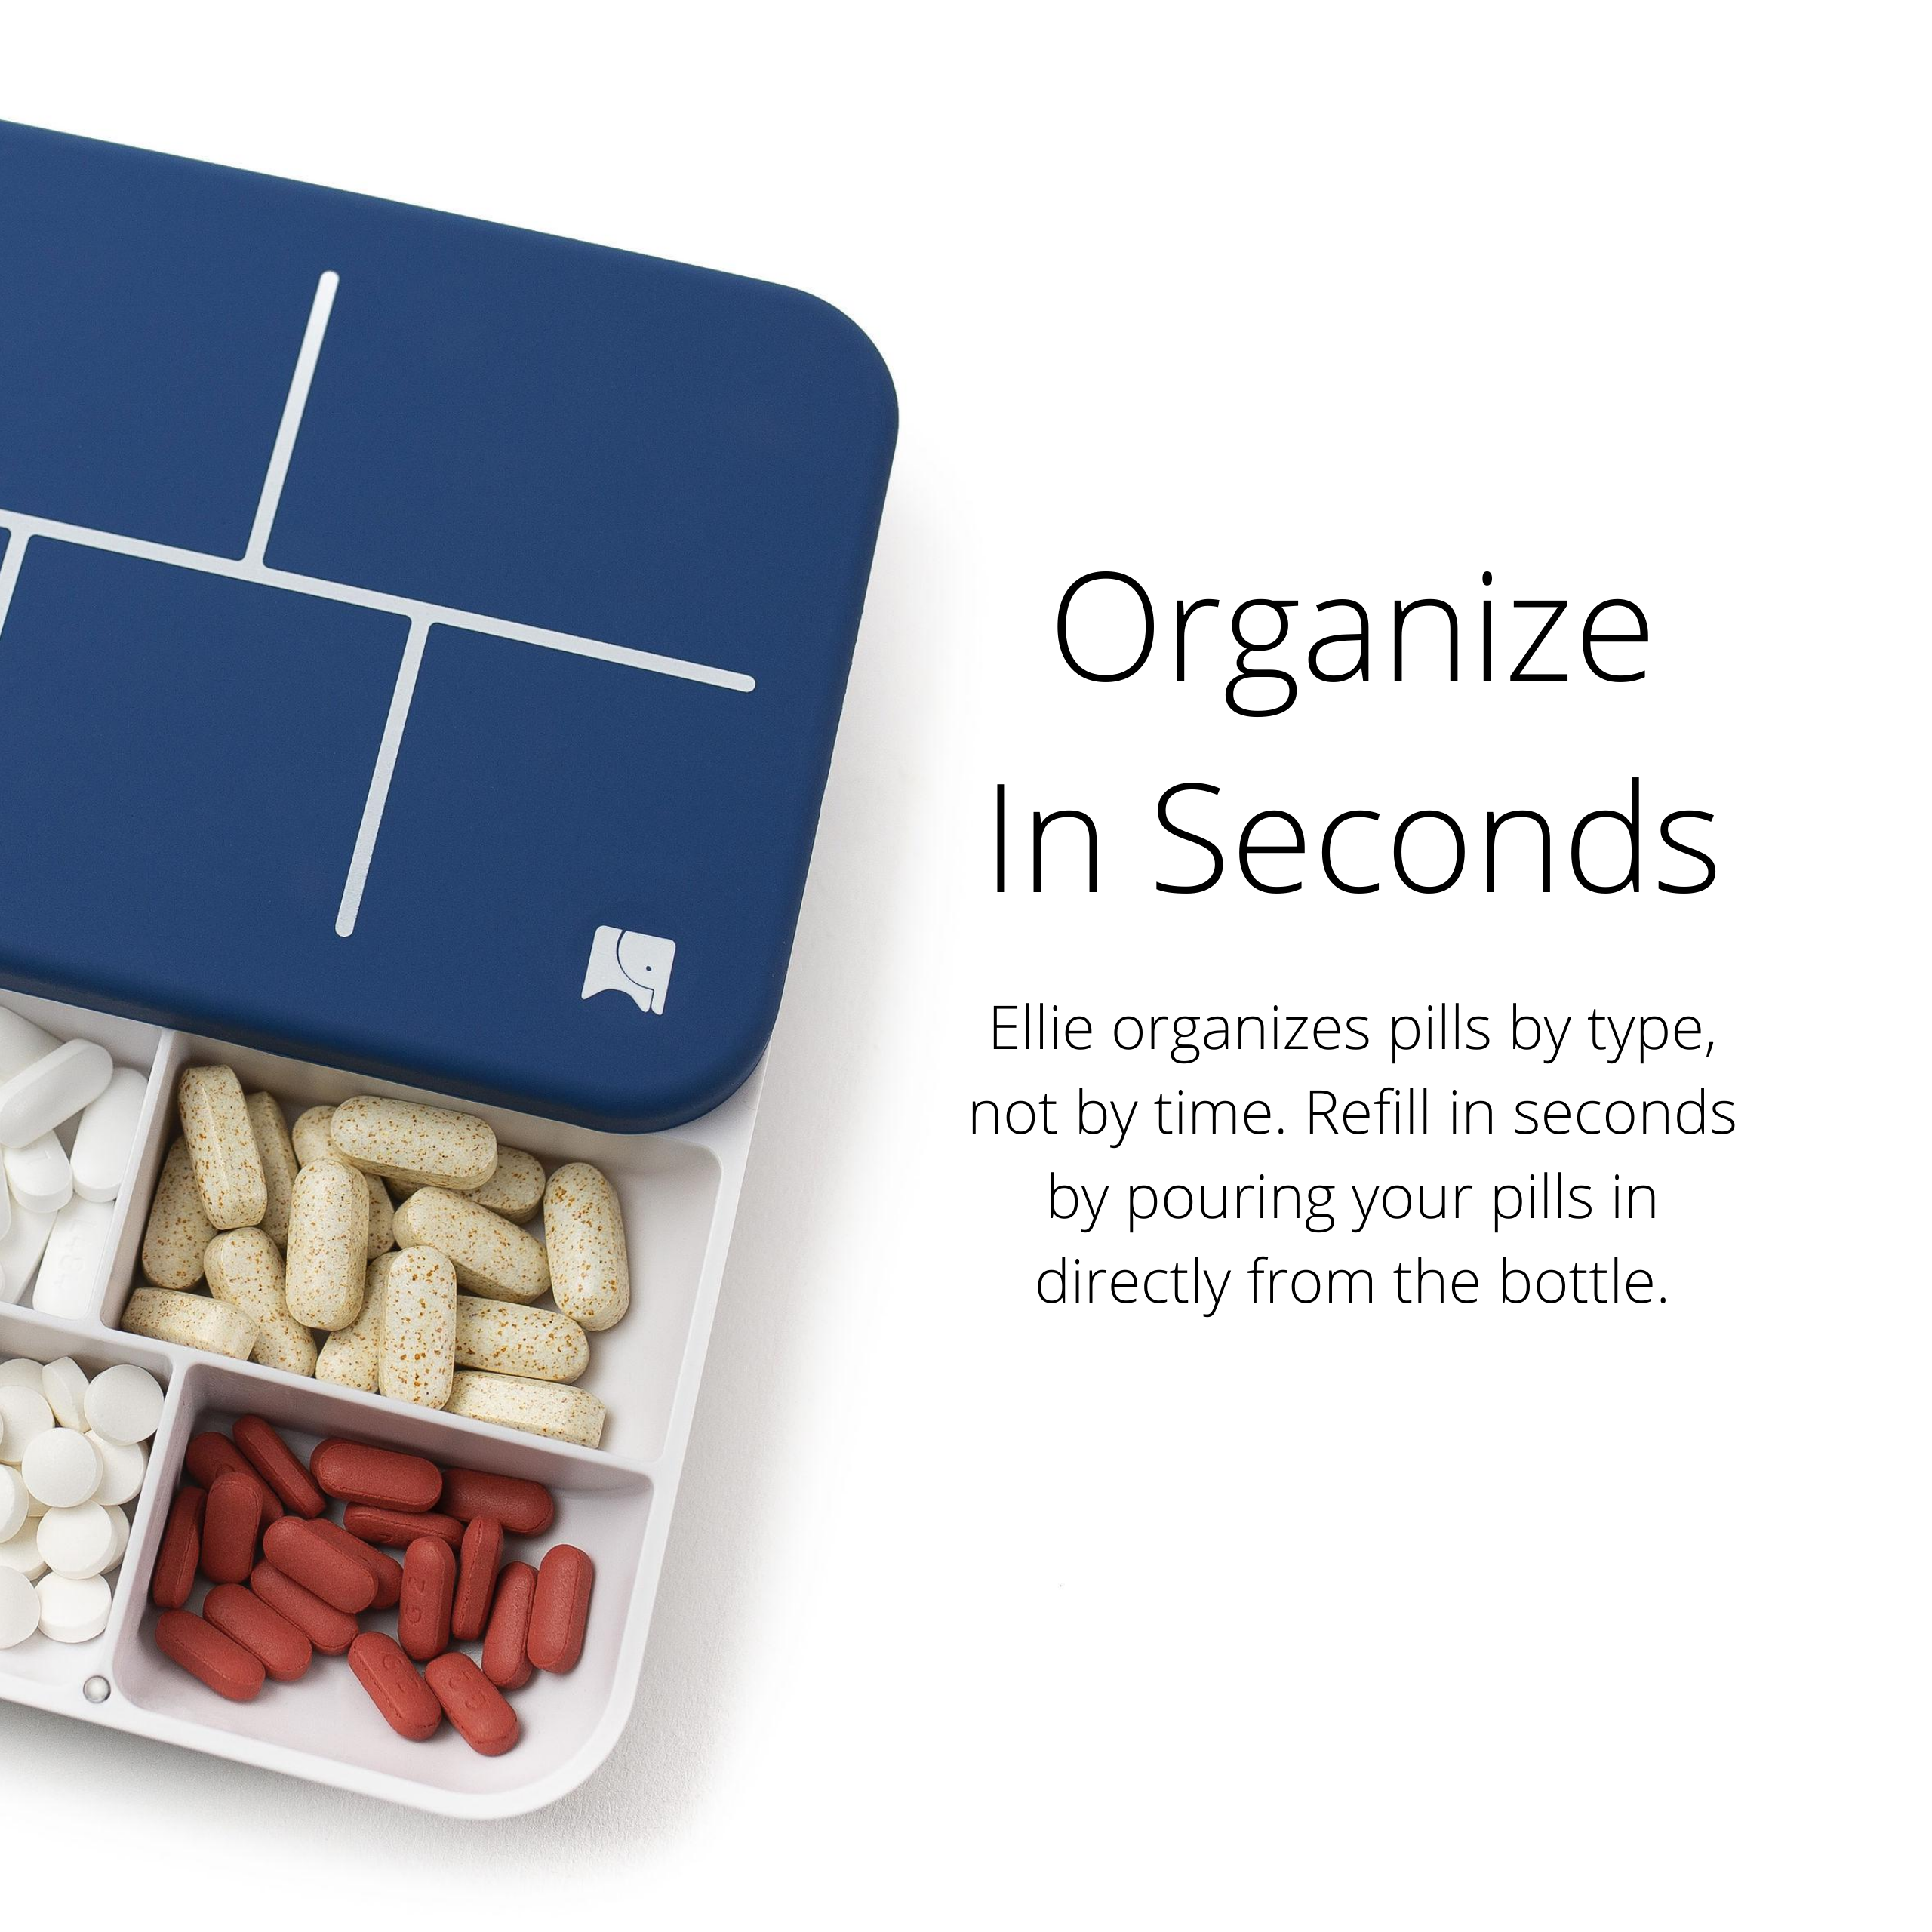 Monthly Pill Organizer by Ellie | Organize Pills in Seconds | Alarm &amp; Phone Notification | Caregiver Notifications | Lights Indicate Which Pills to Take and How Many